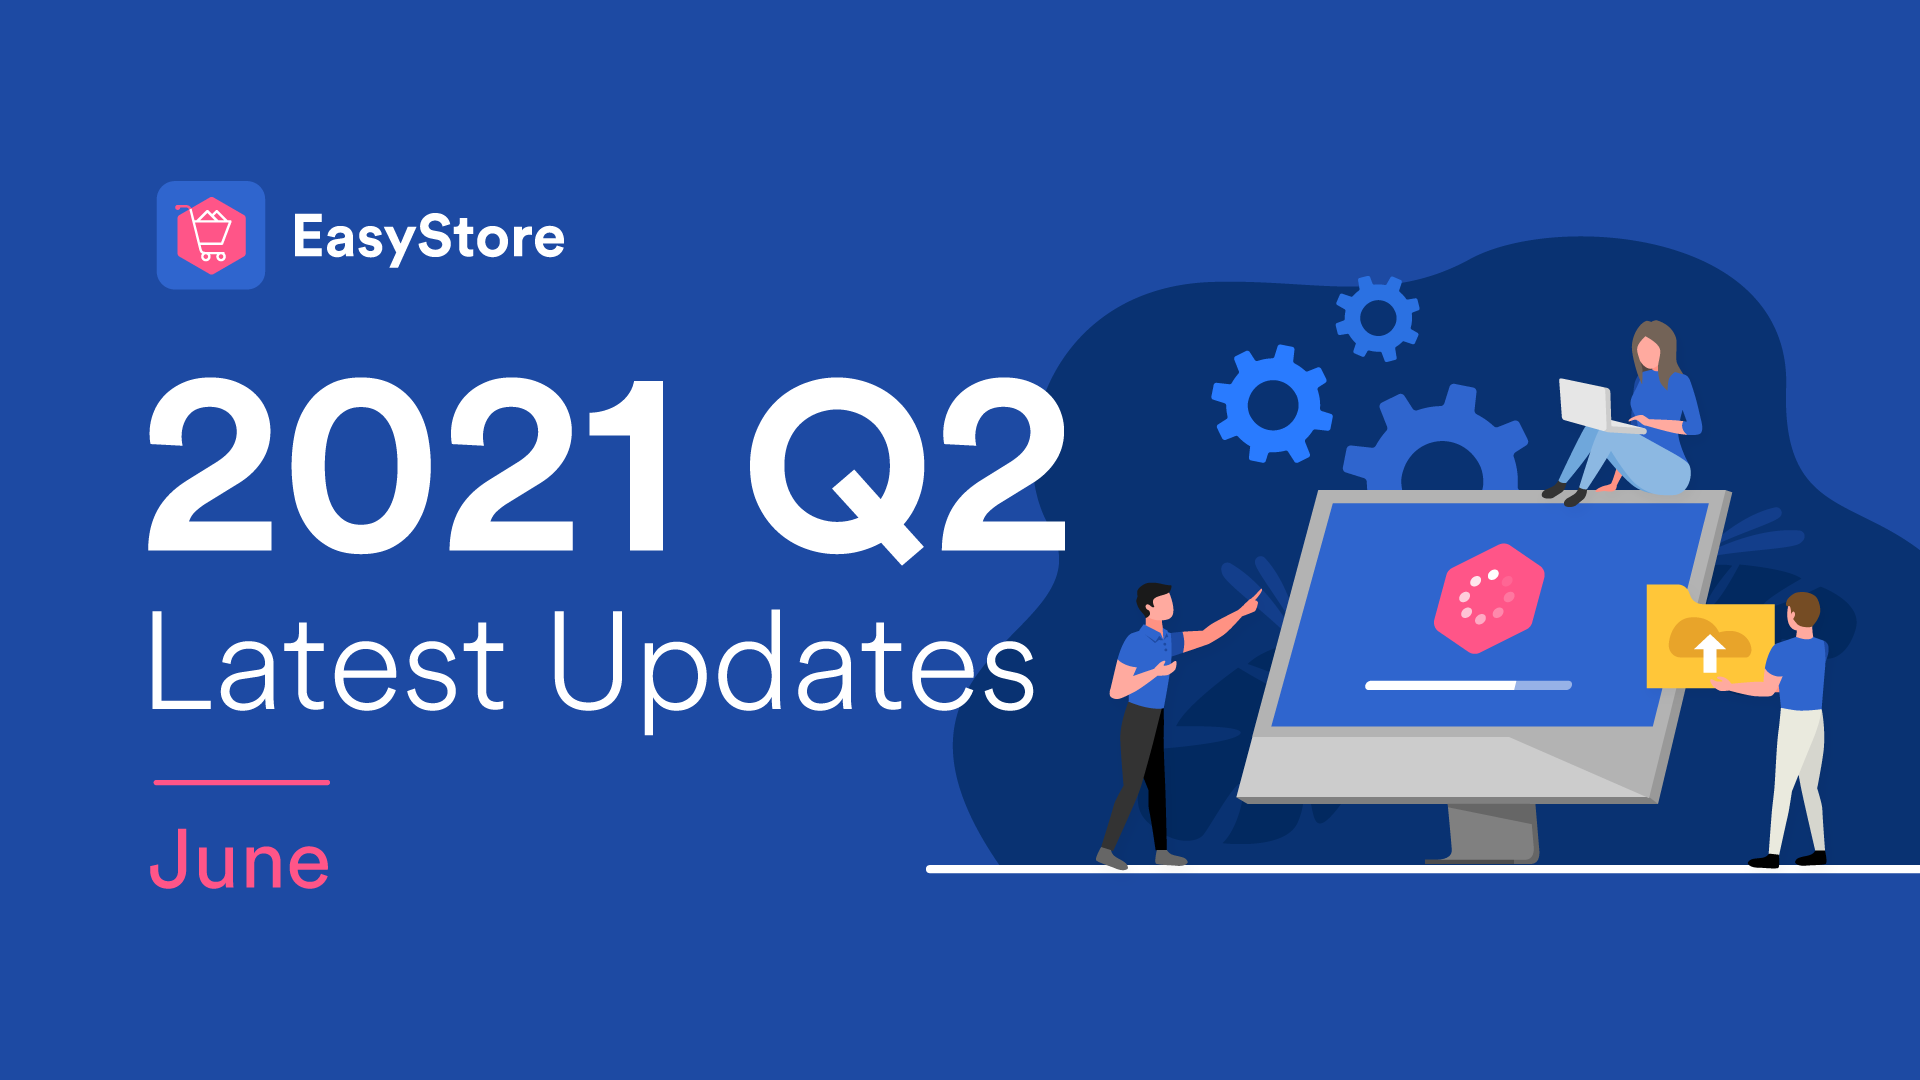 EasyStore Latest Updates: April - June 2021 | EasyStore